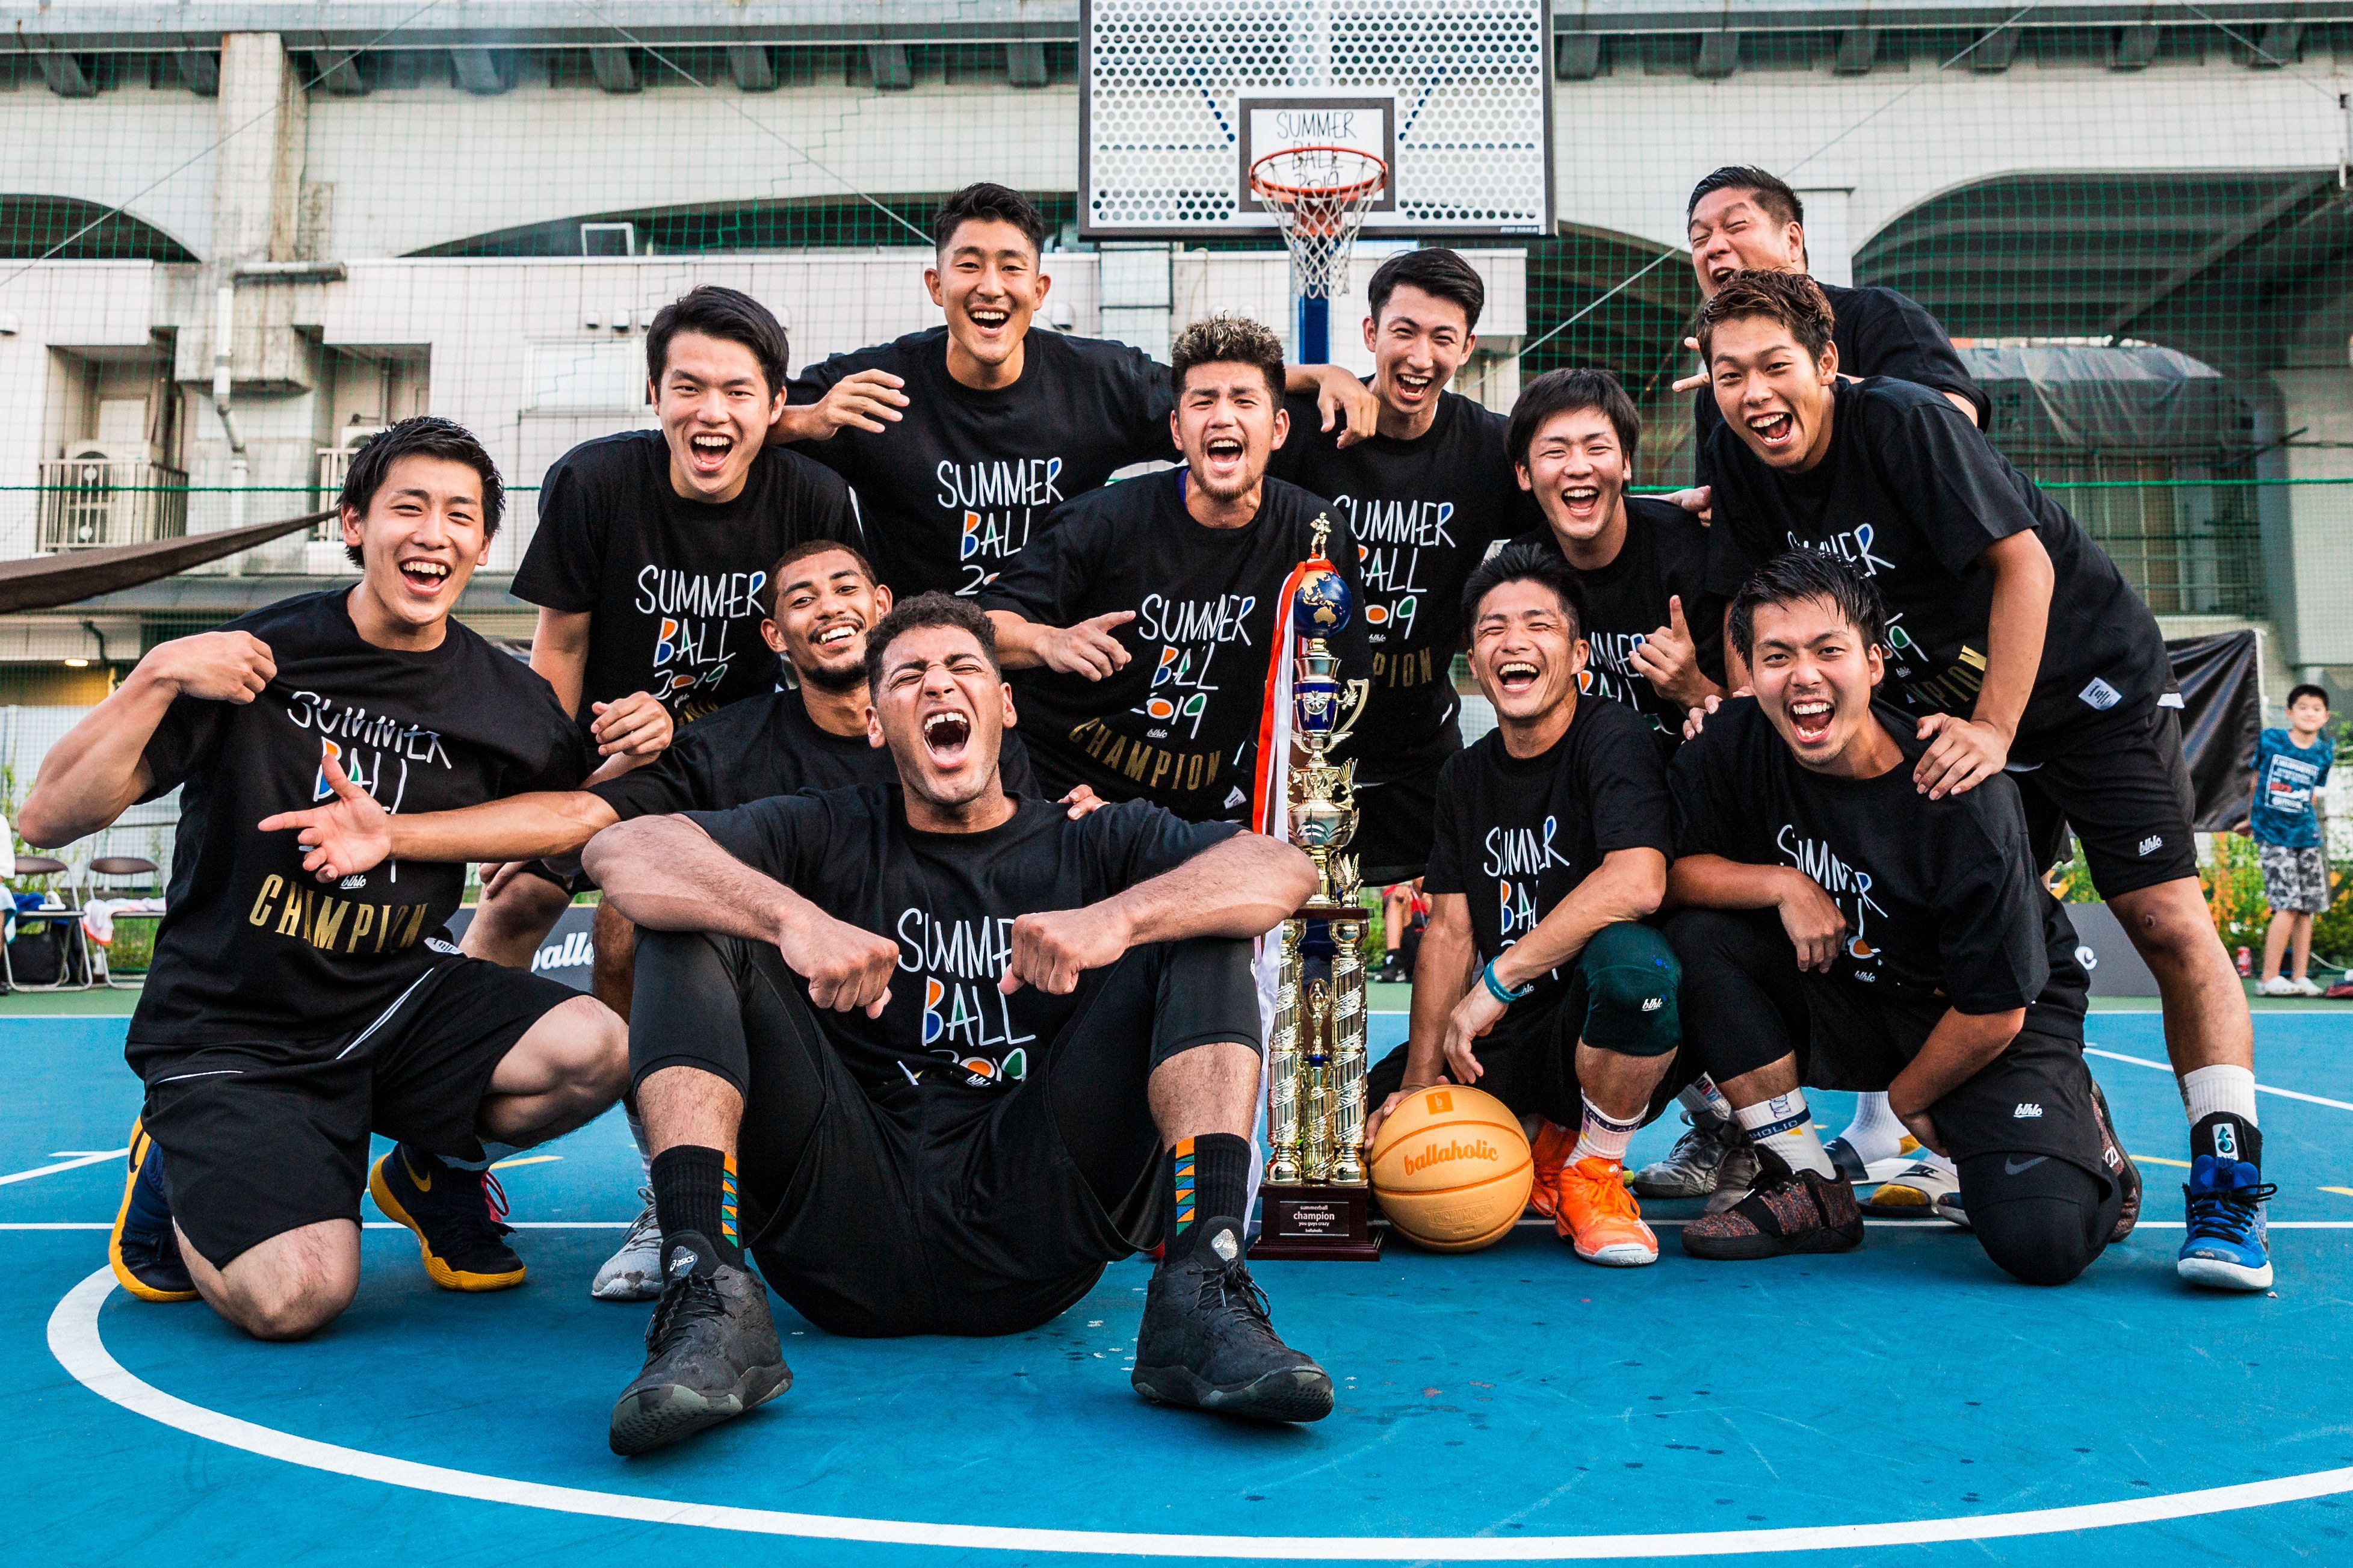 Interview: Tana from ballaholic Talks Being 'Basketball Crazy' in